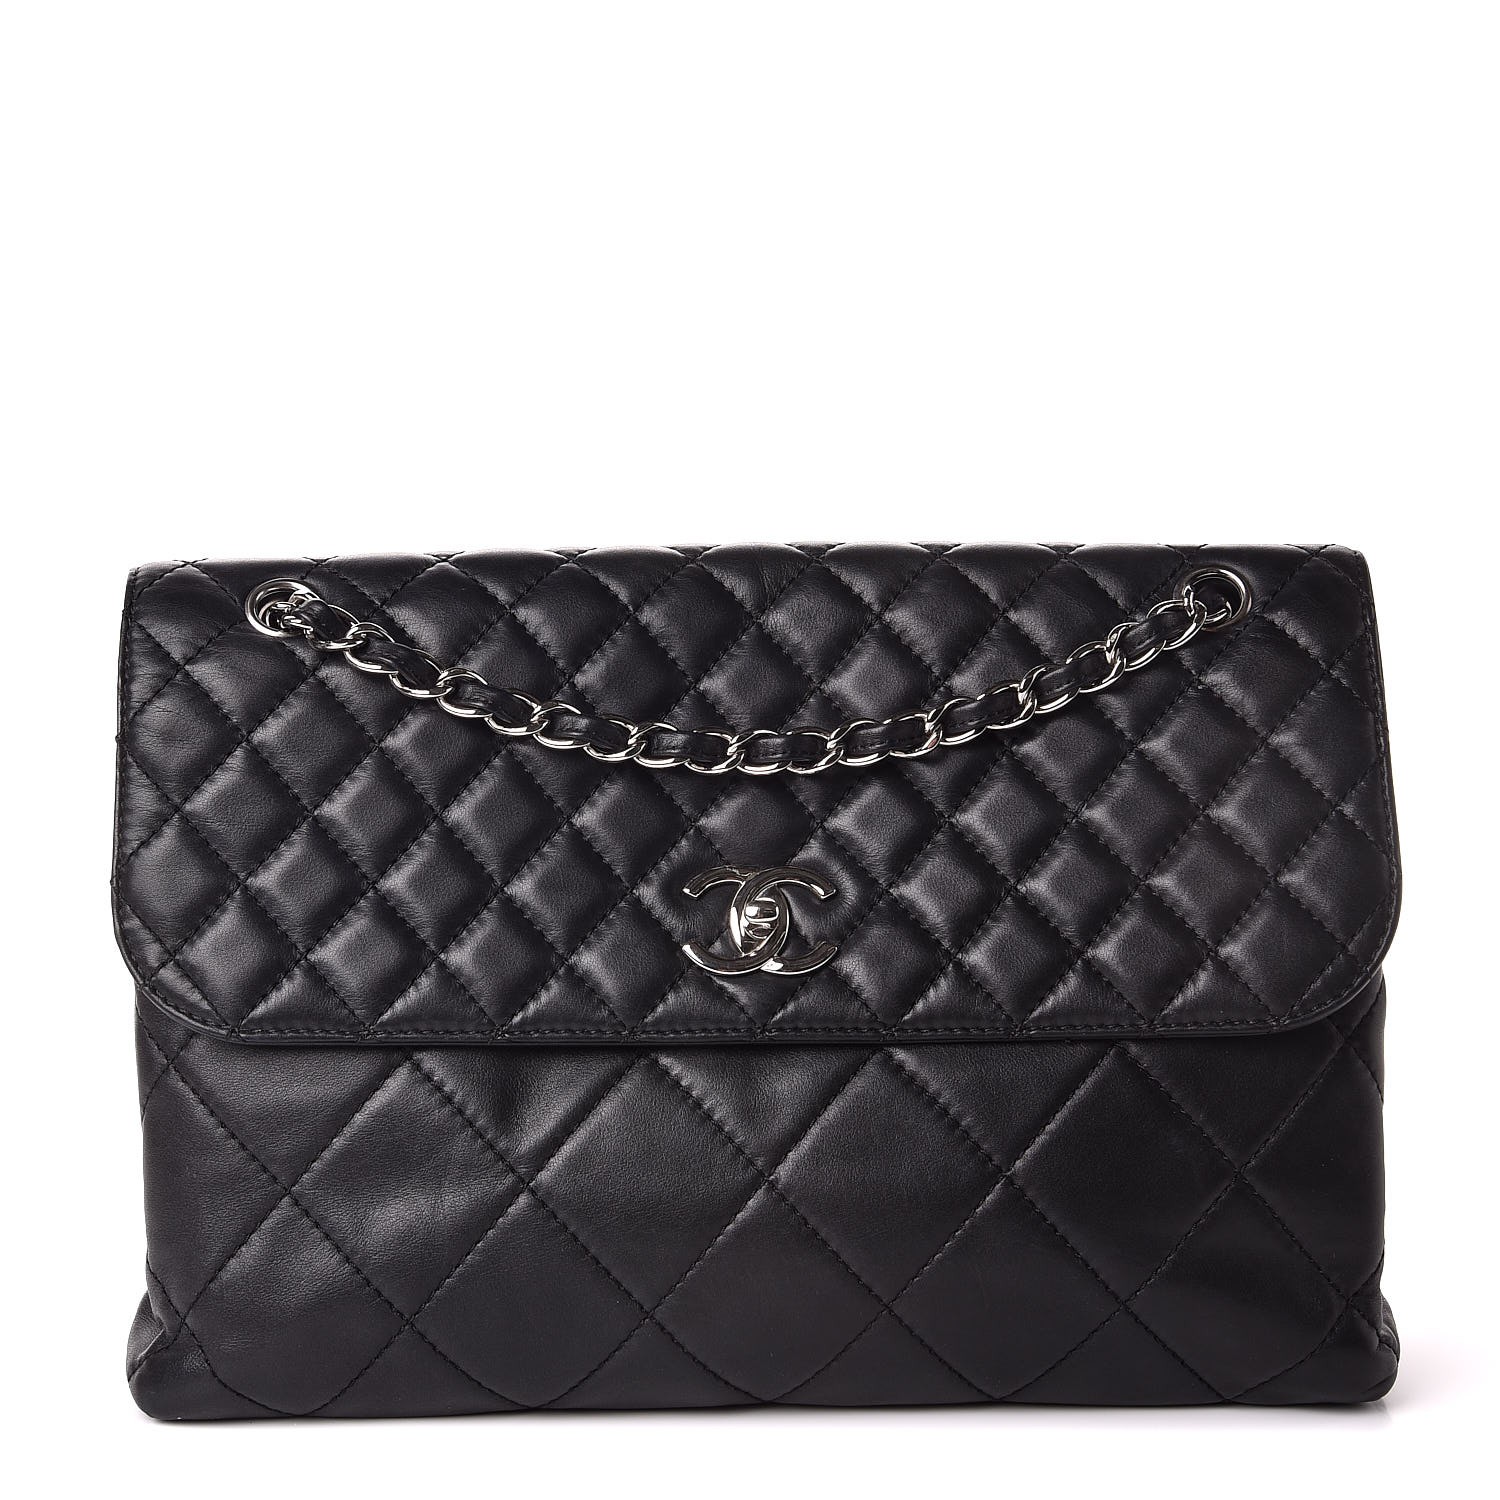 CHANEL Calfskin Quilted In The Business Flap Bag Black 323037